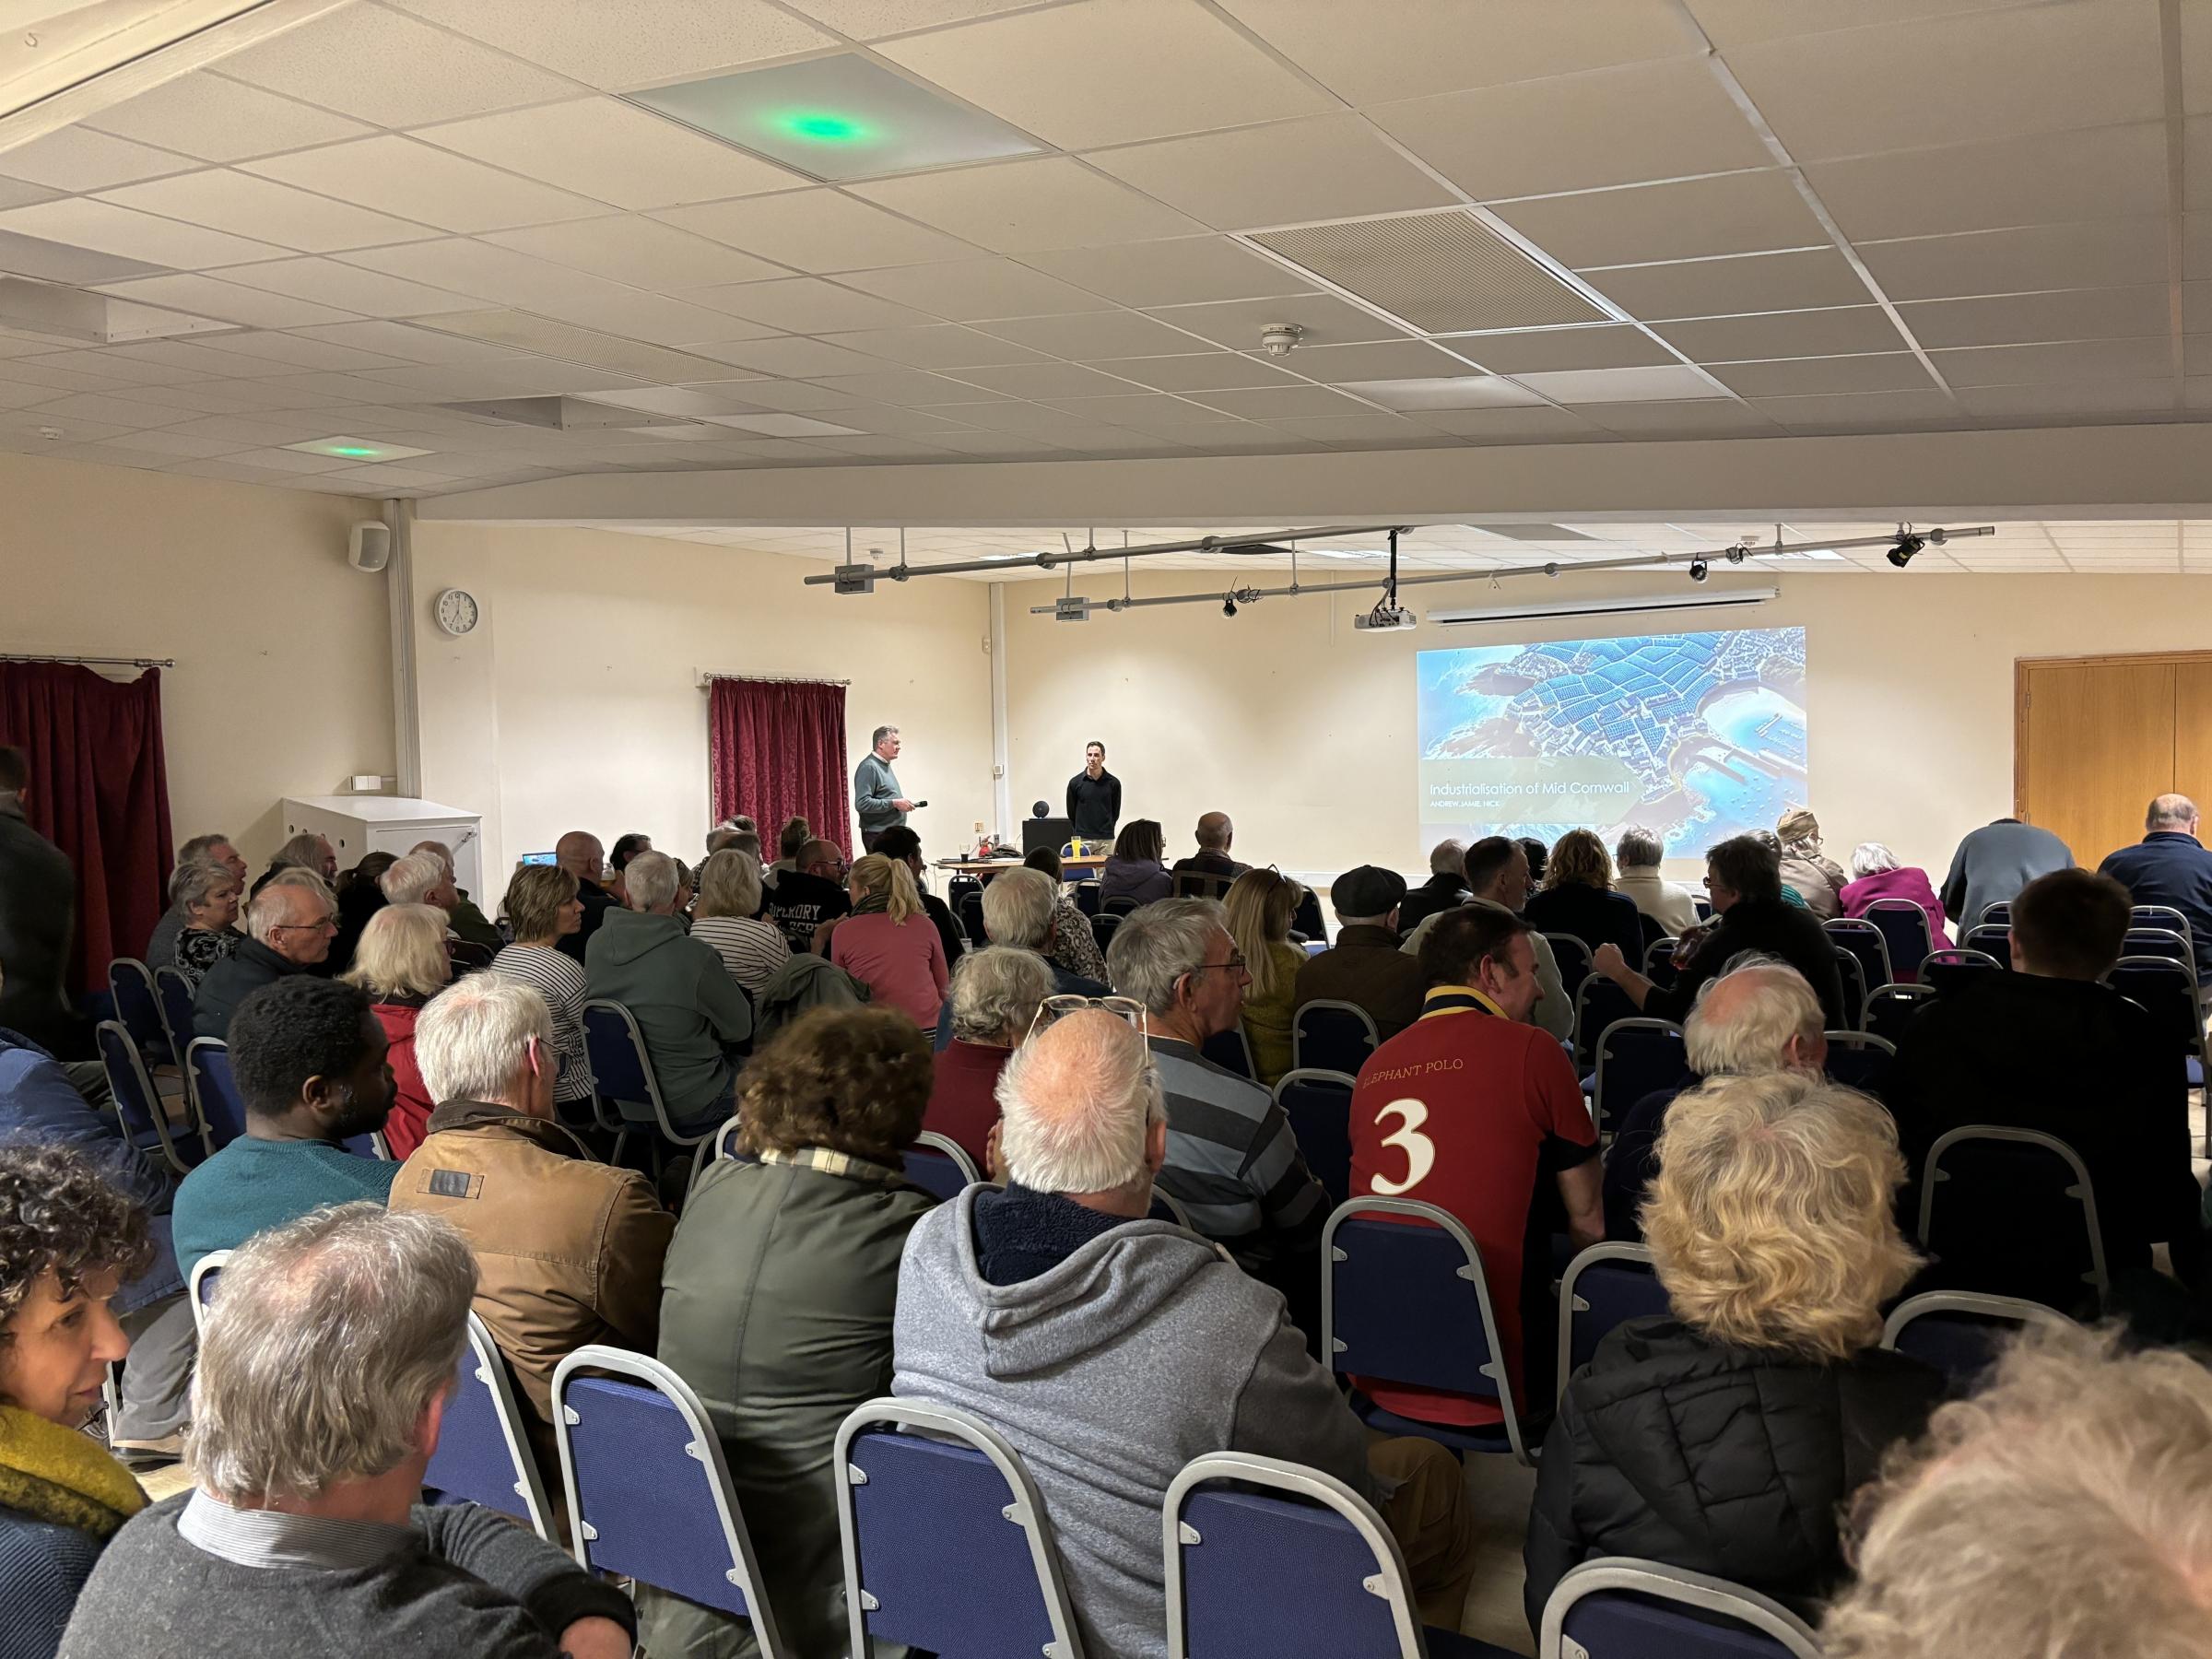 More than 100 people attended the meeting to discuss concerns about plans for industrial solar parks in mid Cornwall (Pic: Lee Trewhela / LDRS)